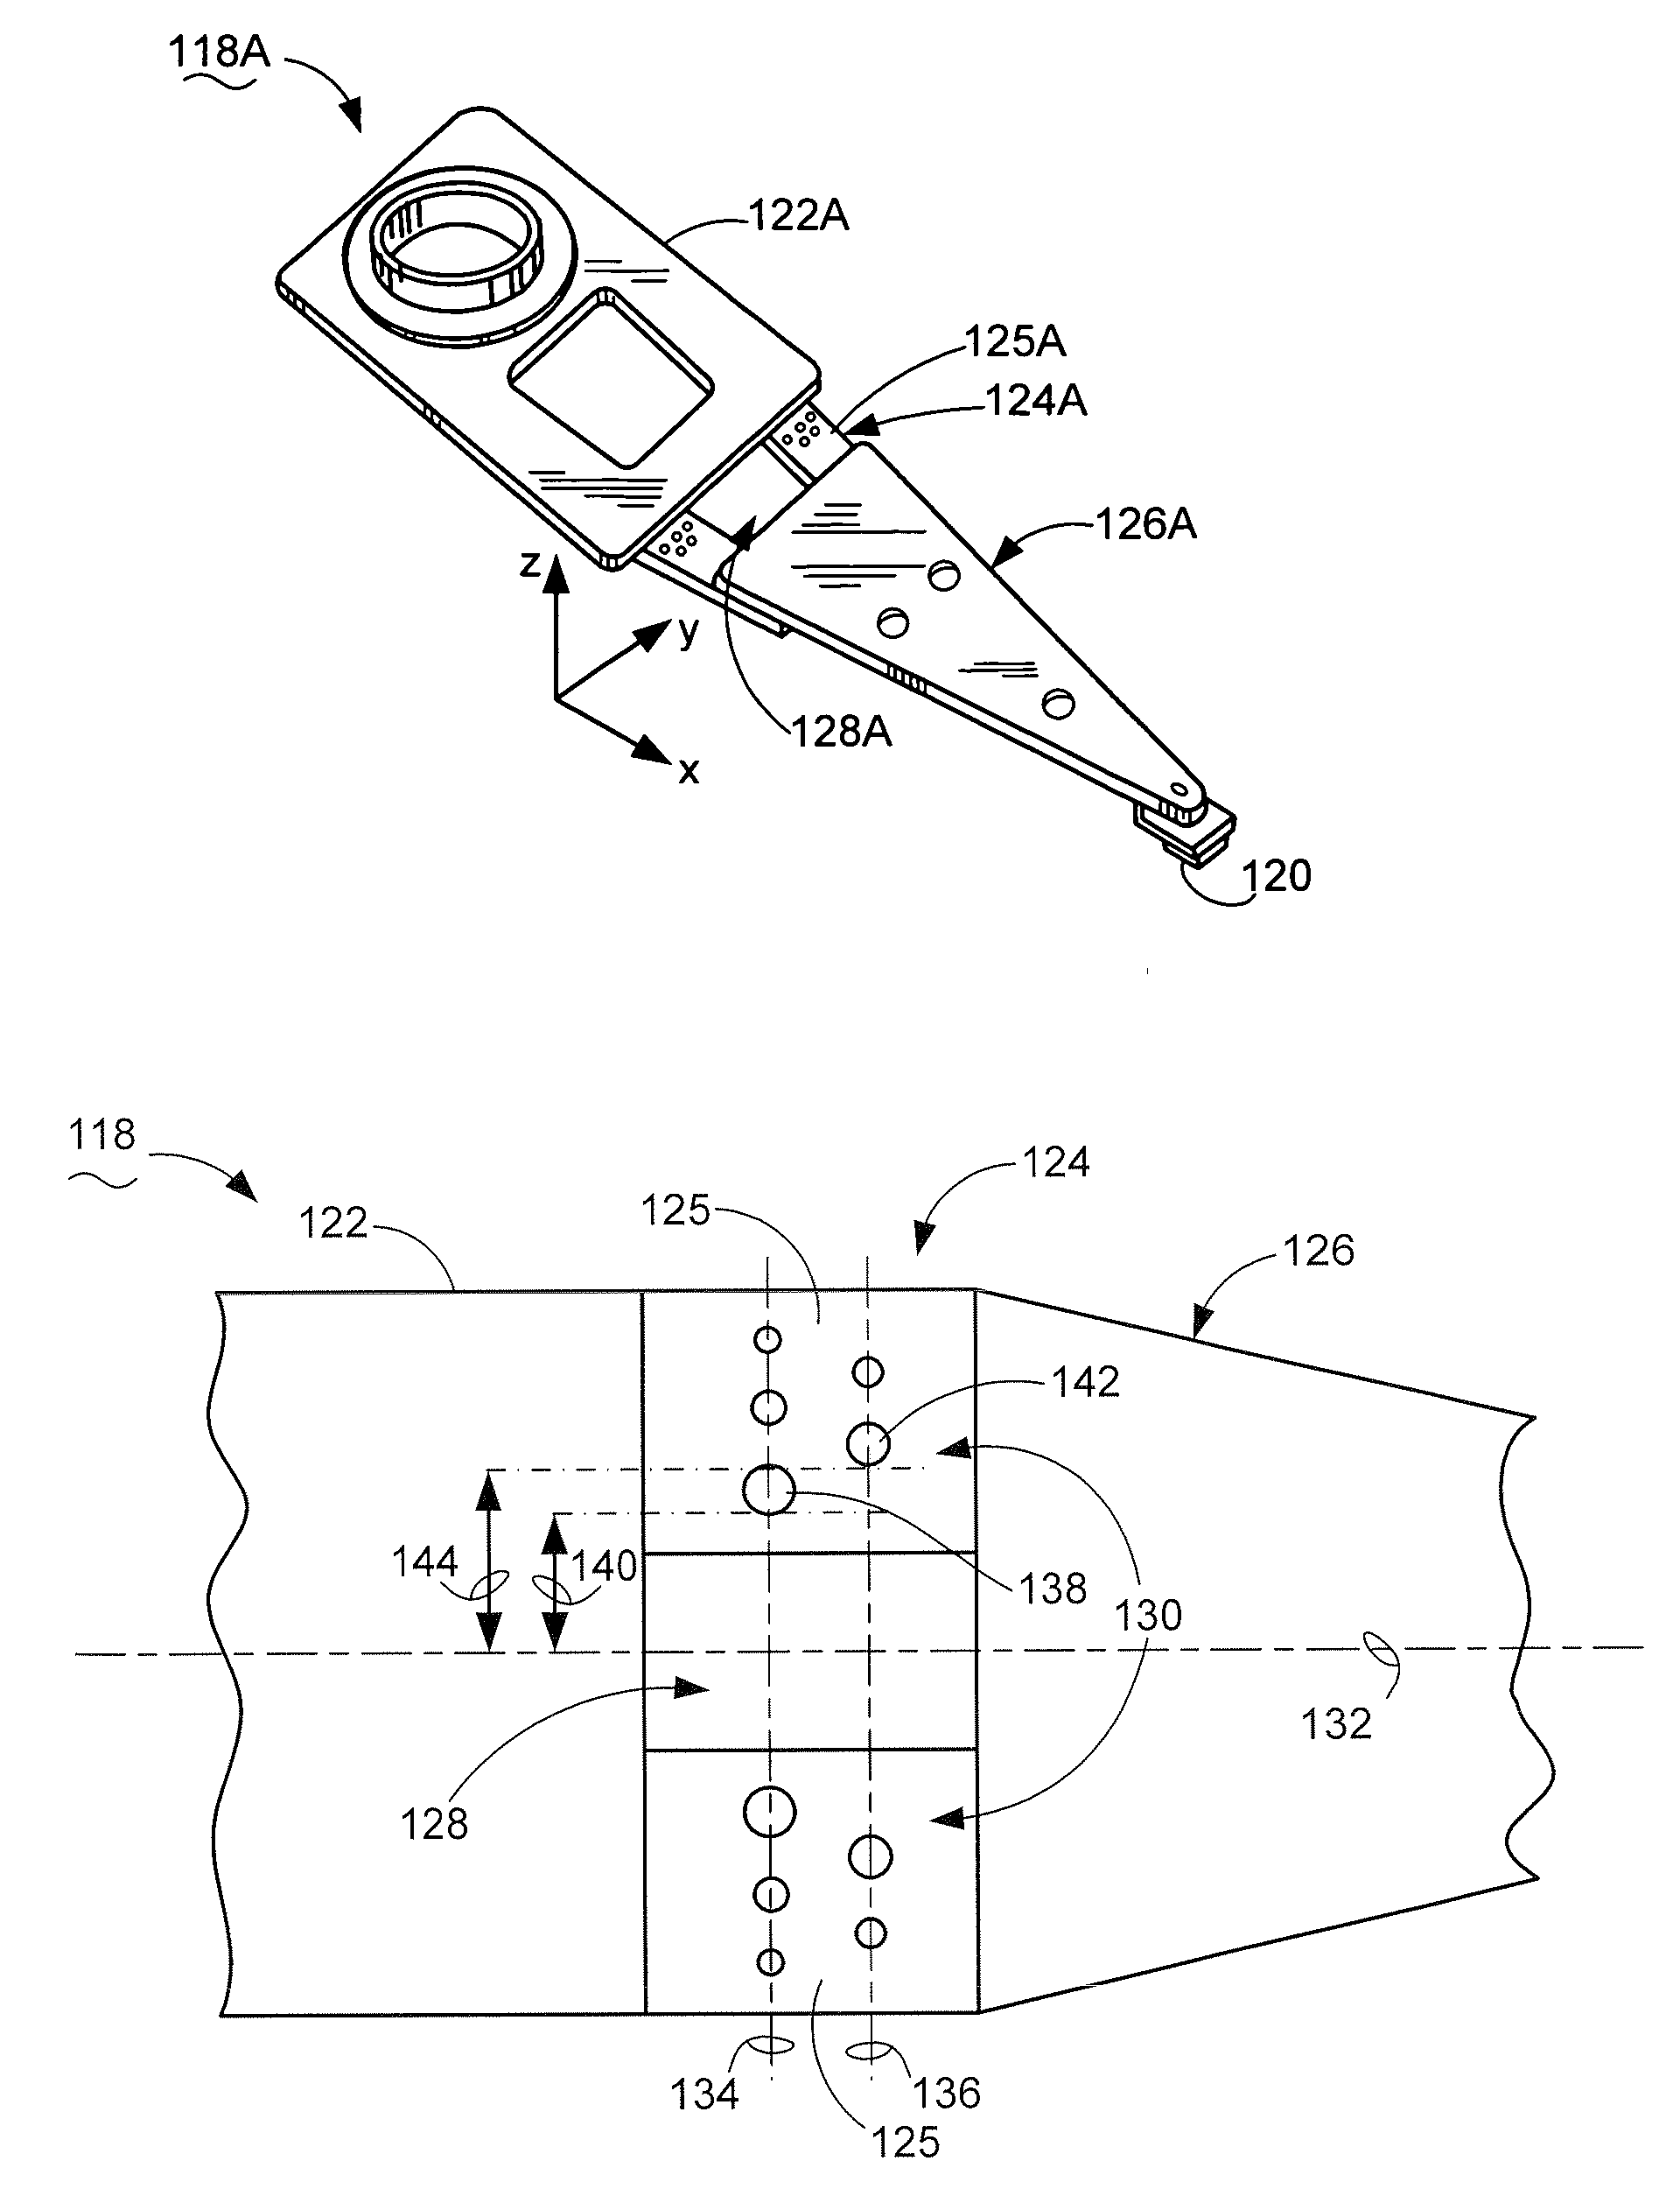 Suspension bend section with stiffness-reducing features